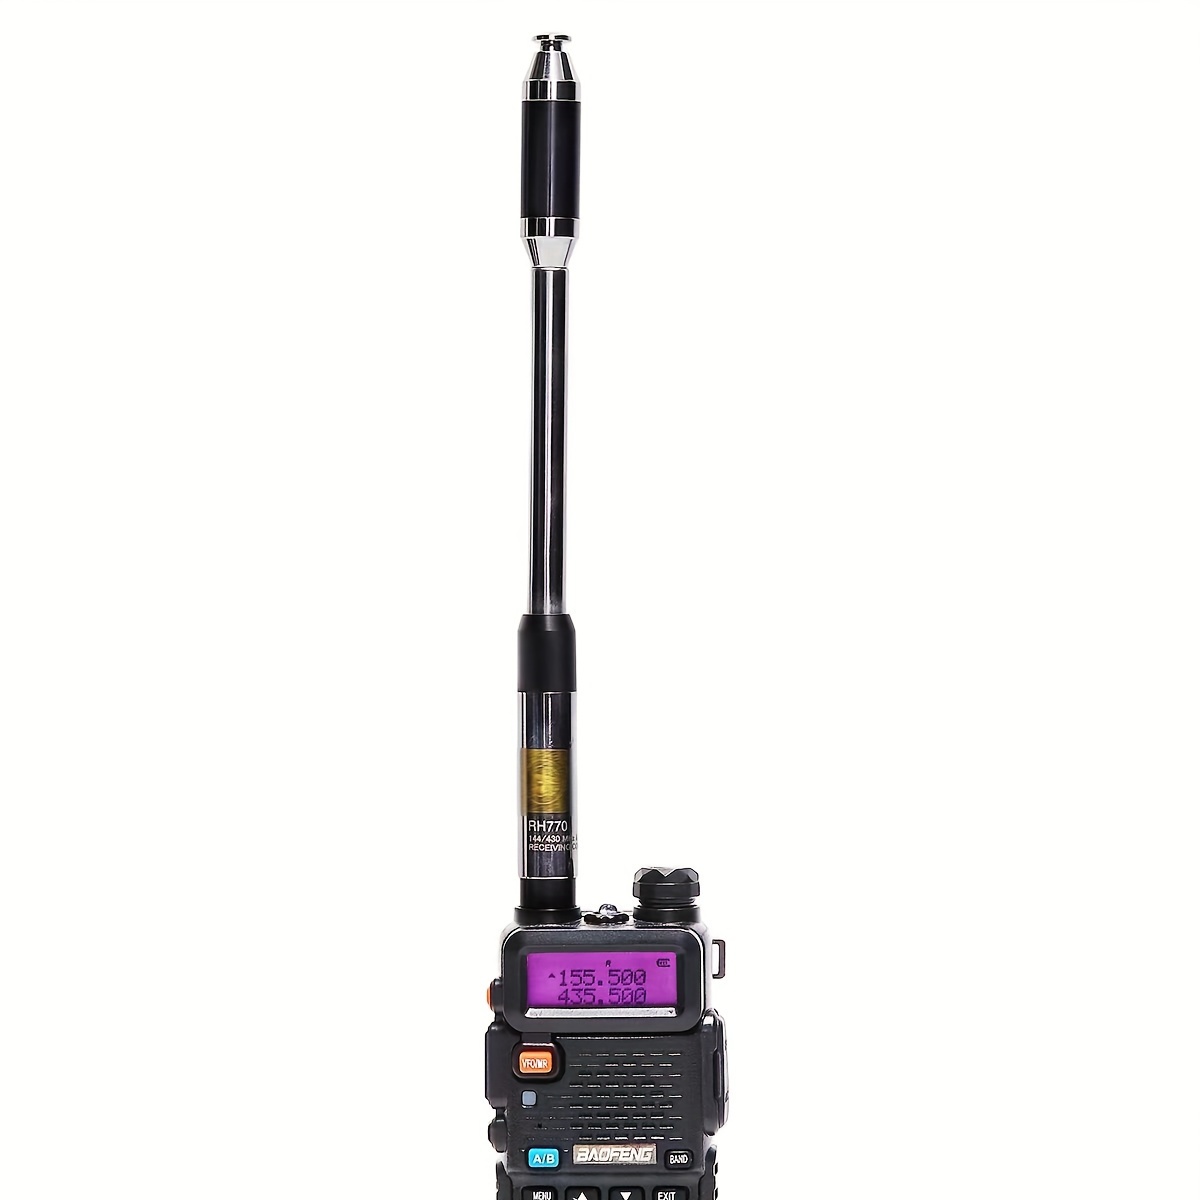 Can this sony spool antenna extender works for walkie talkies? : r